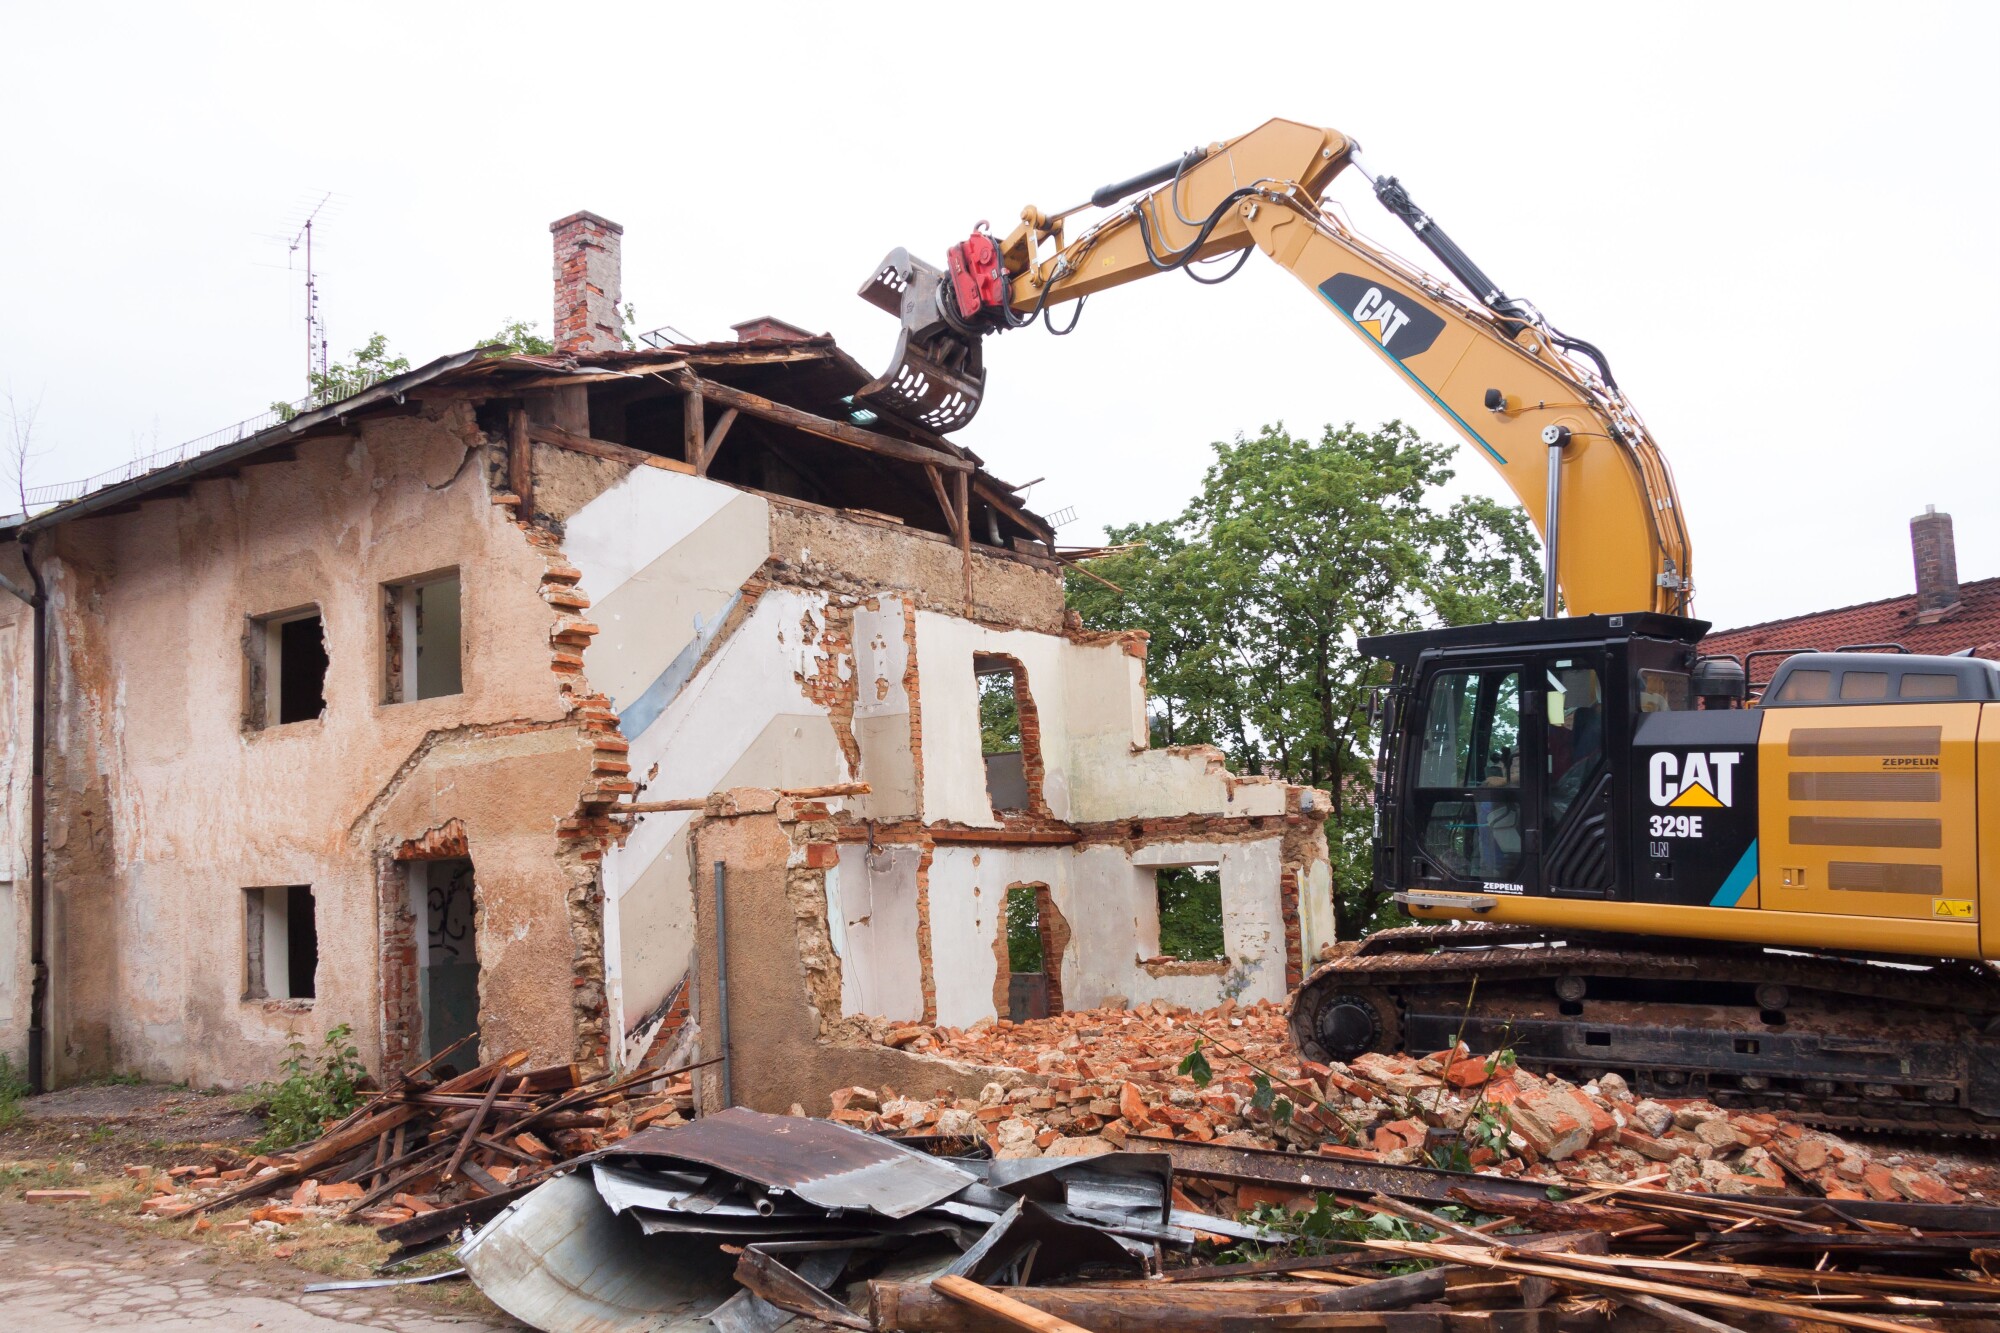 Do you need demolition services for your construction projects? Here are some tips to help you hire the right building demolition contractors.